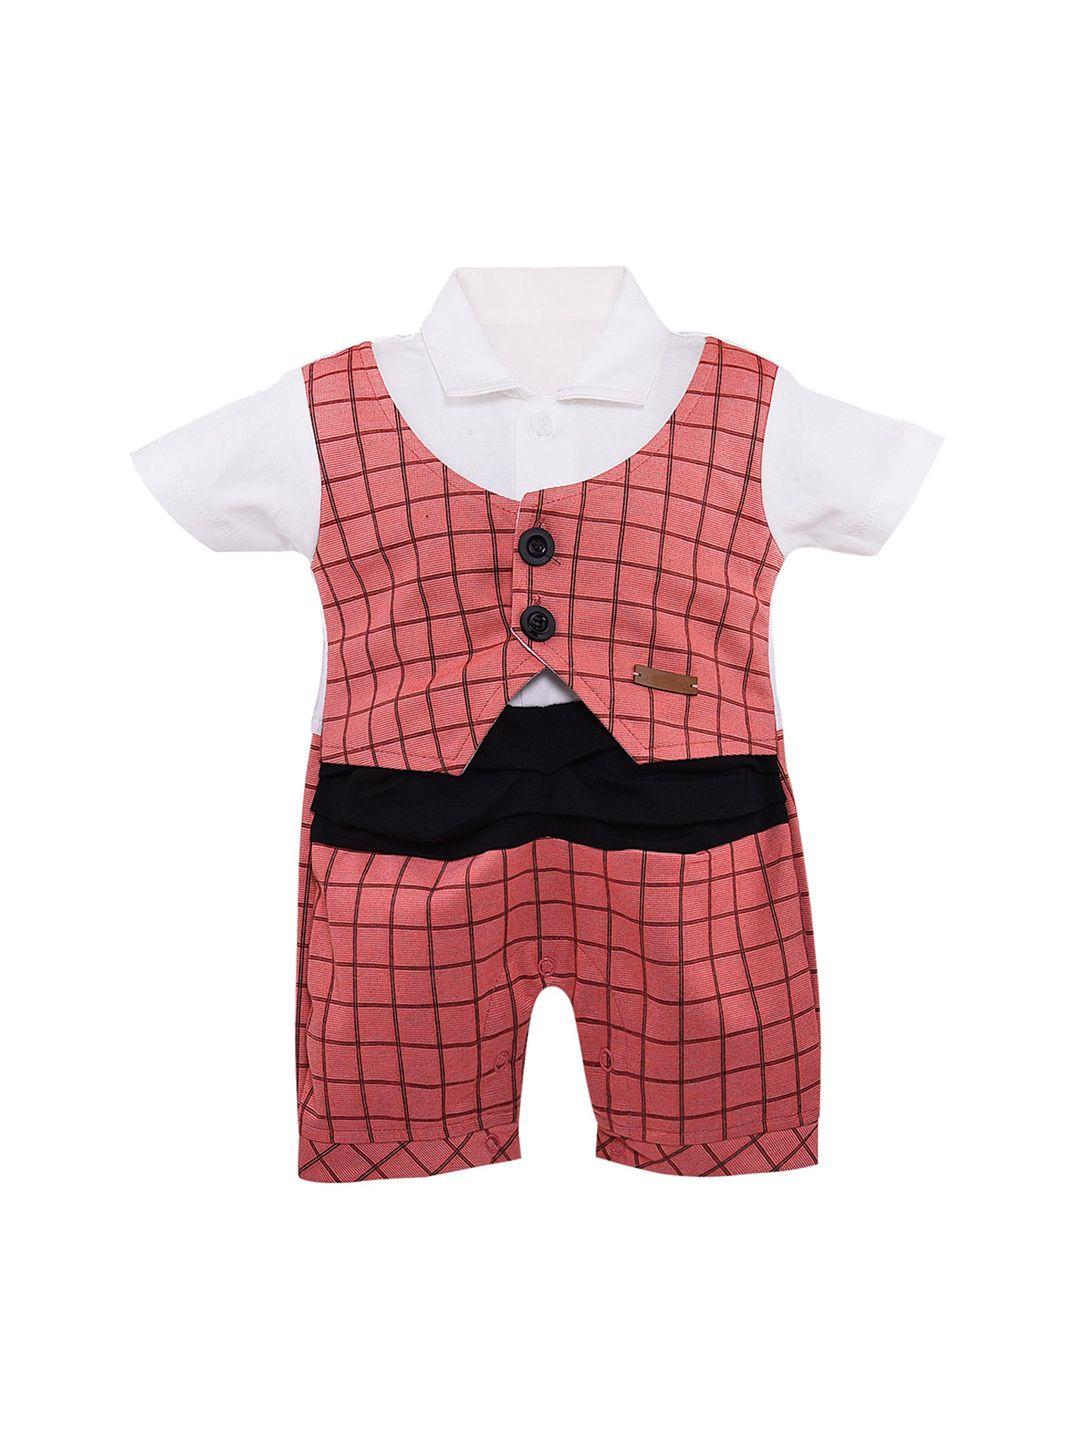 wish karo infants boys red & white checked rompers